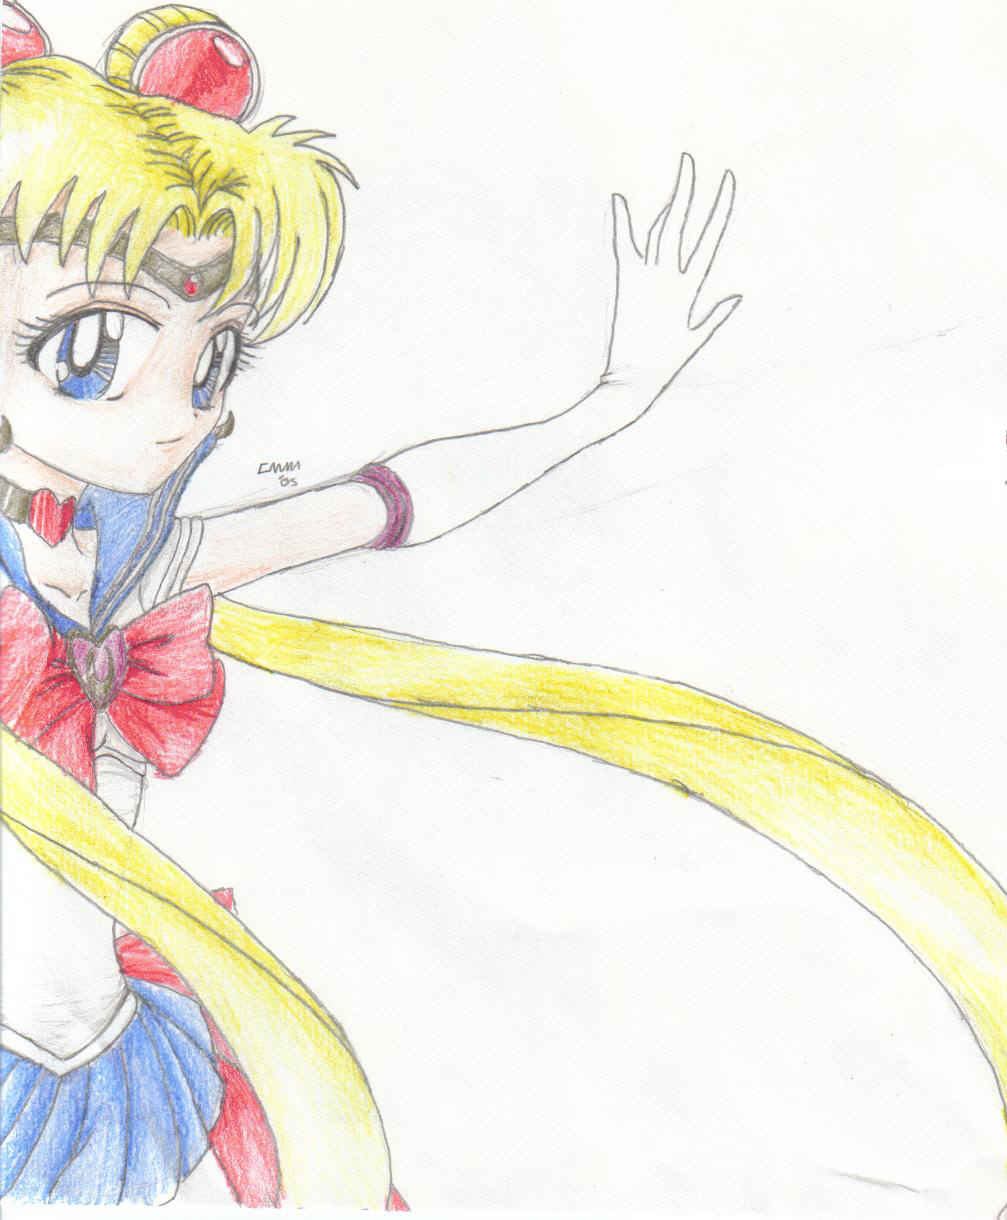 Sailor Moon(my first attempt in 3 years) by Sailor_Crystal_Heart